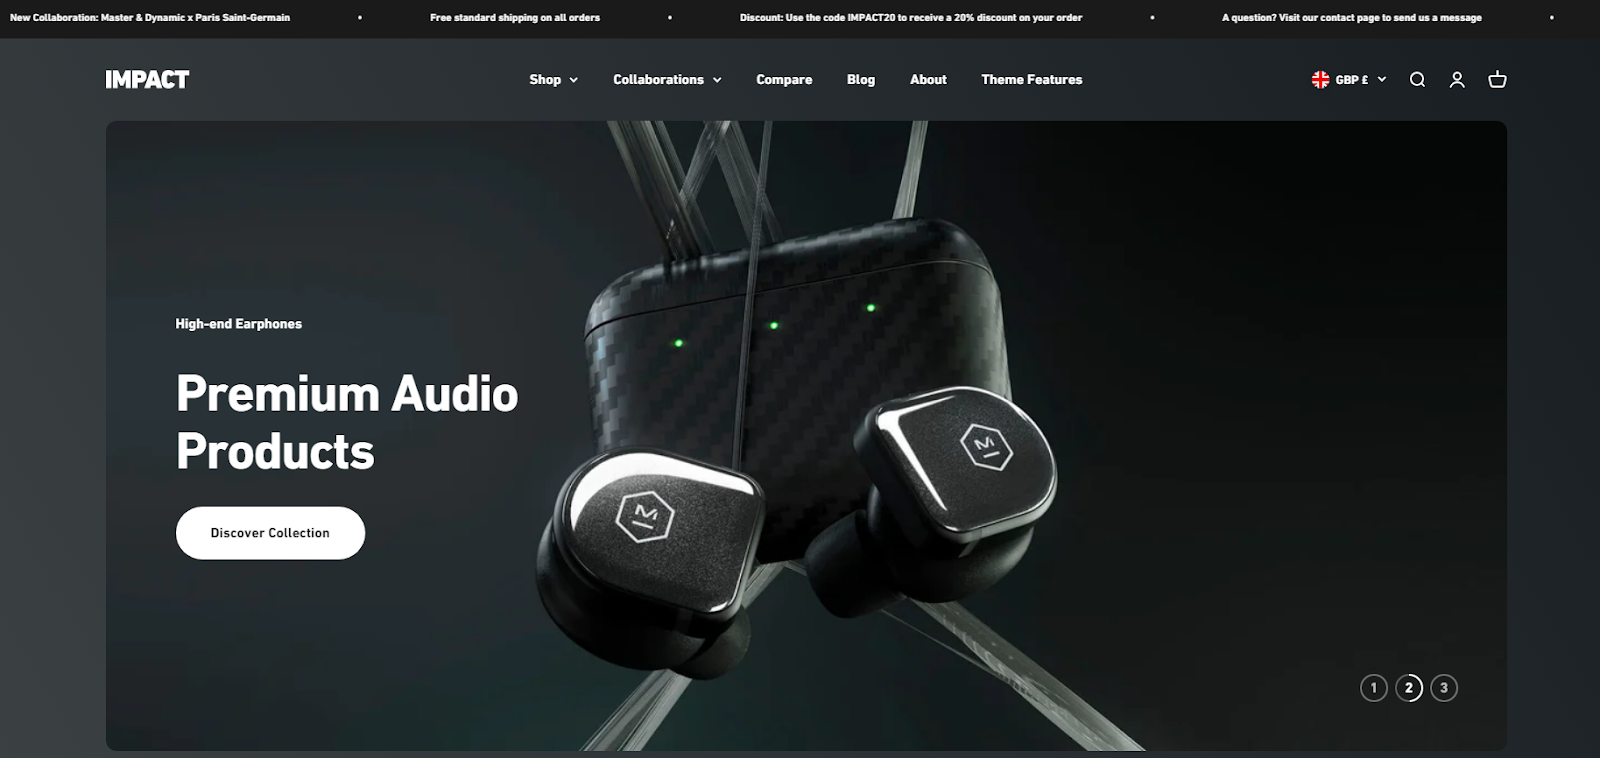 Shopify's Sound template, which shows an electronics e-commerce store with a large image of earphones